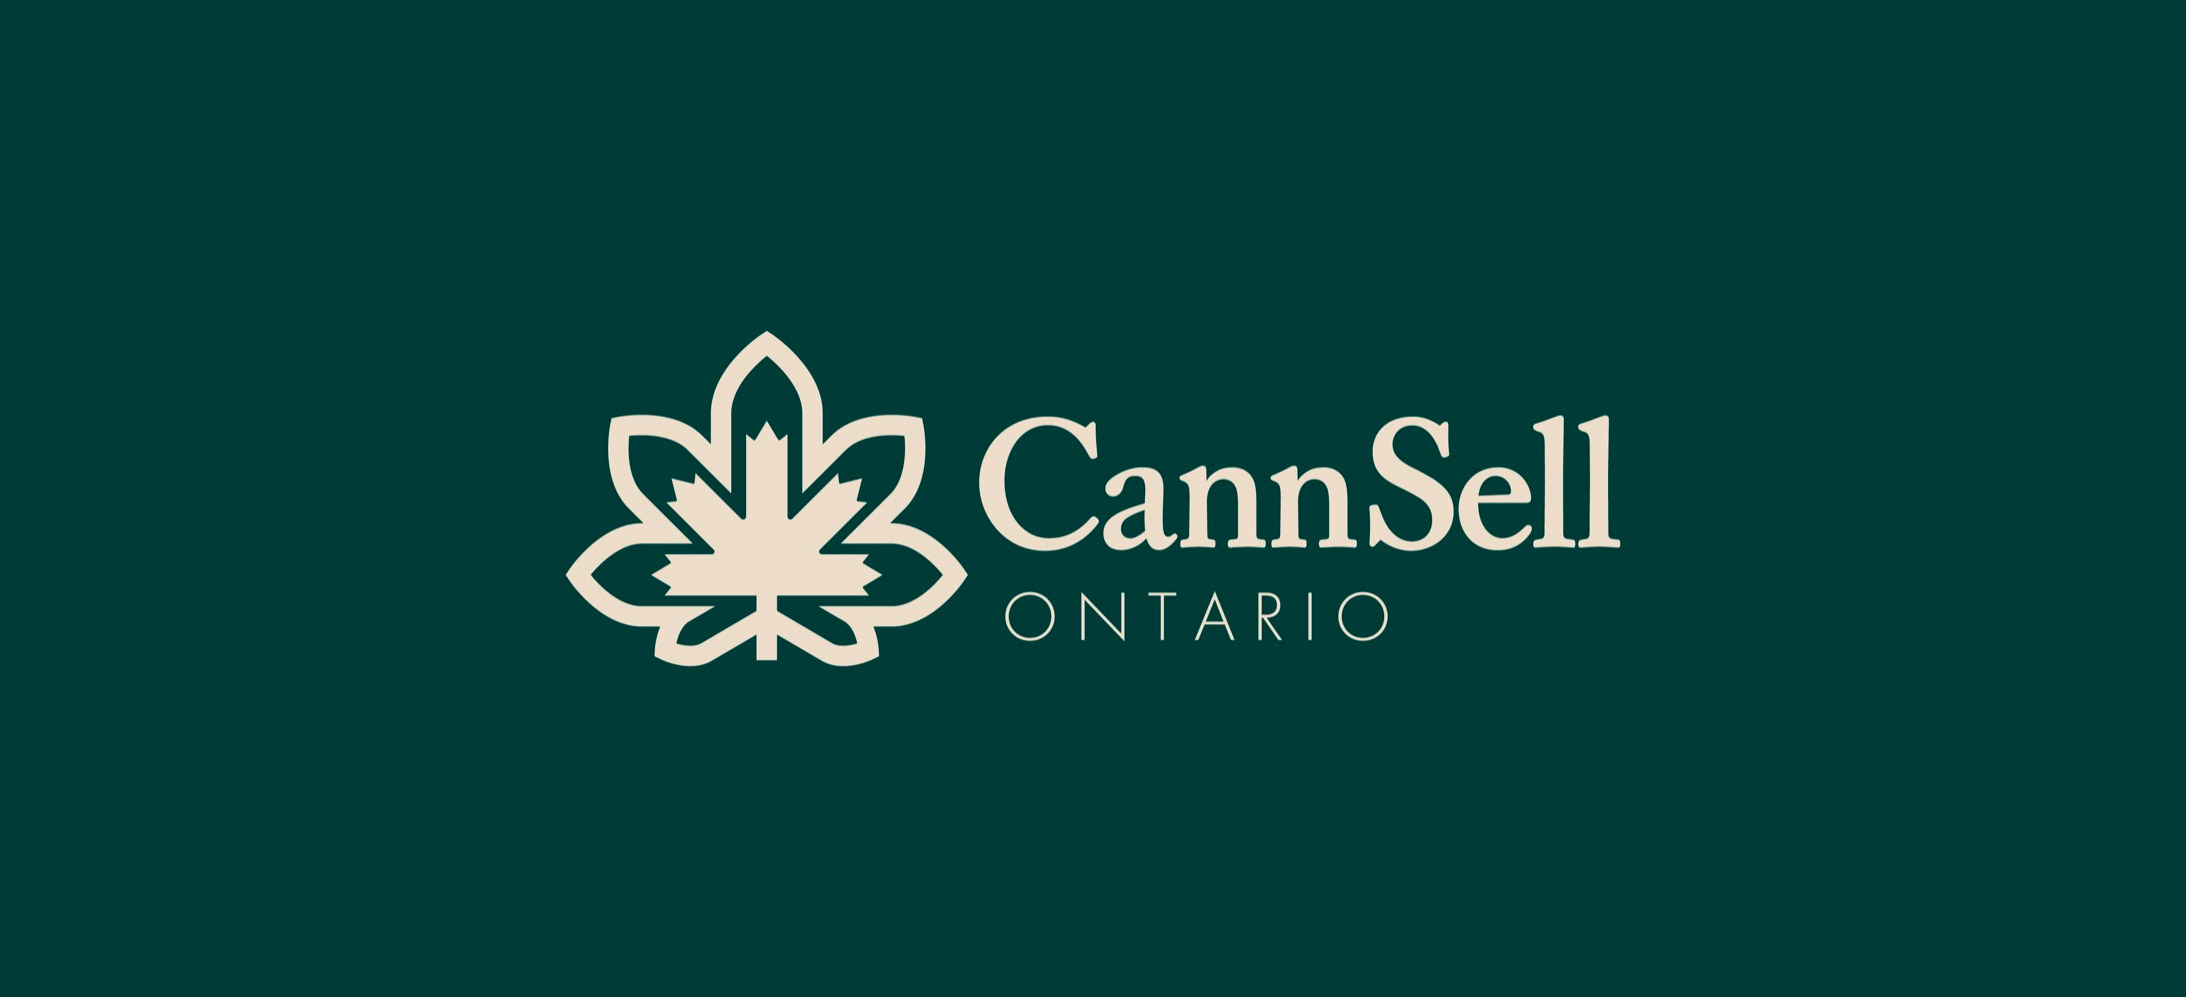 We Know Training acquires CannSell, Ontario’s leader in cannabis retail training